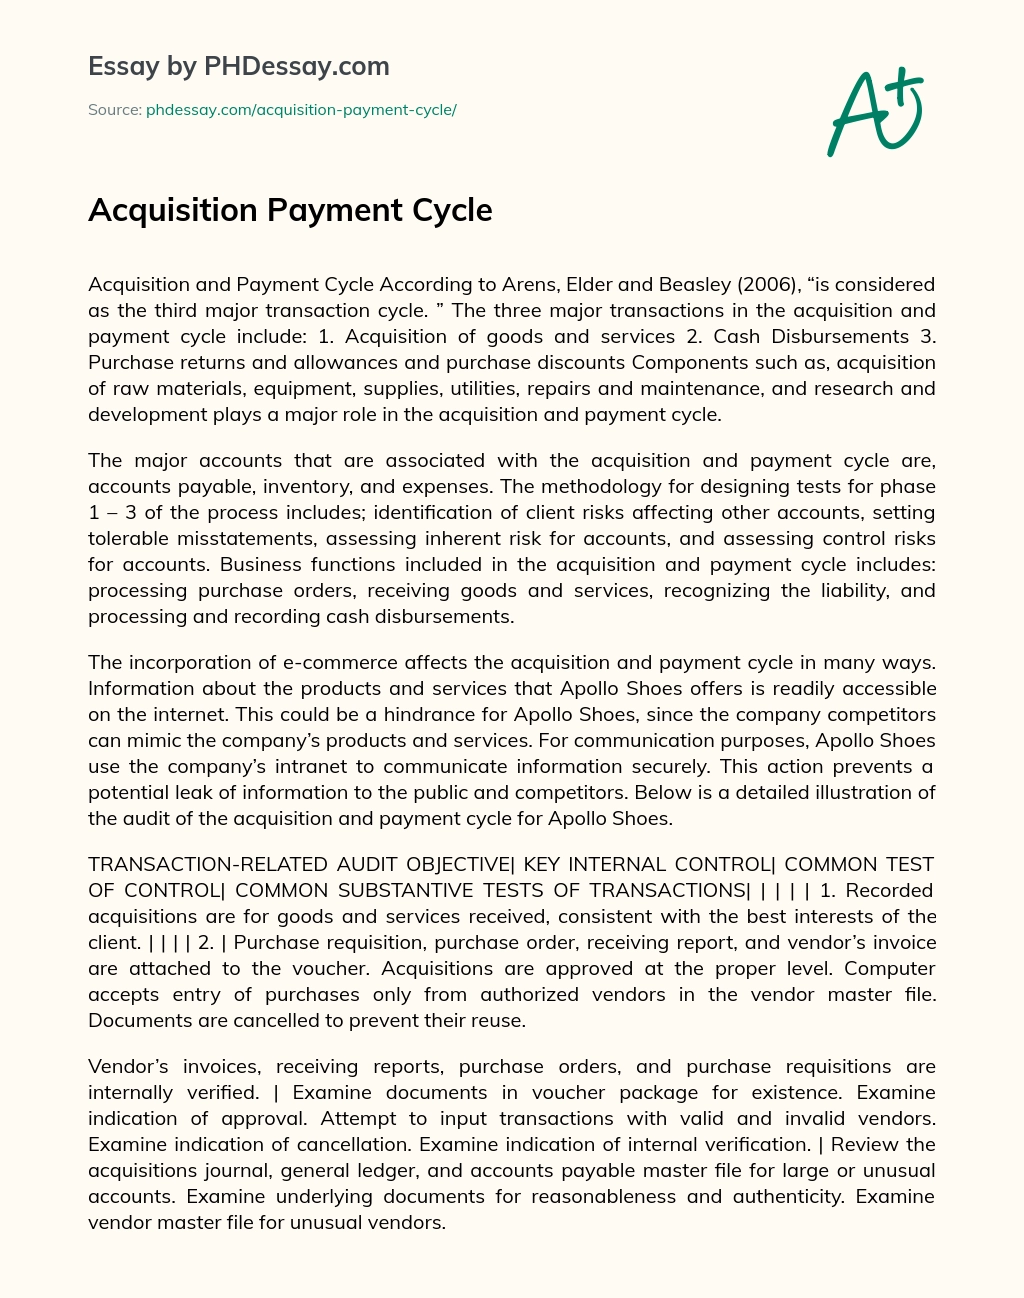 Acquisition Payment Cycle essay